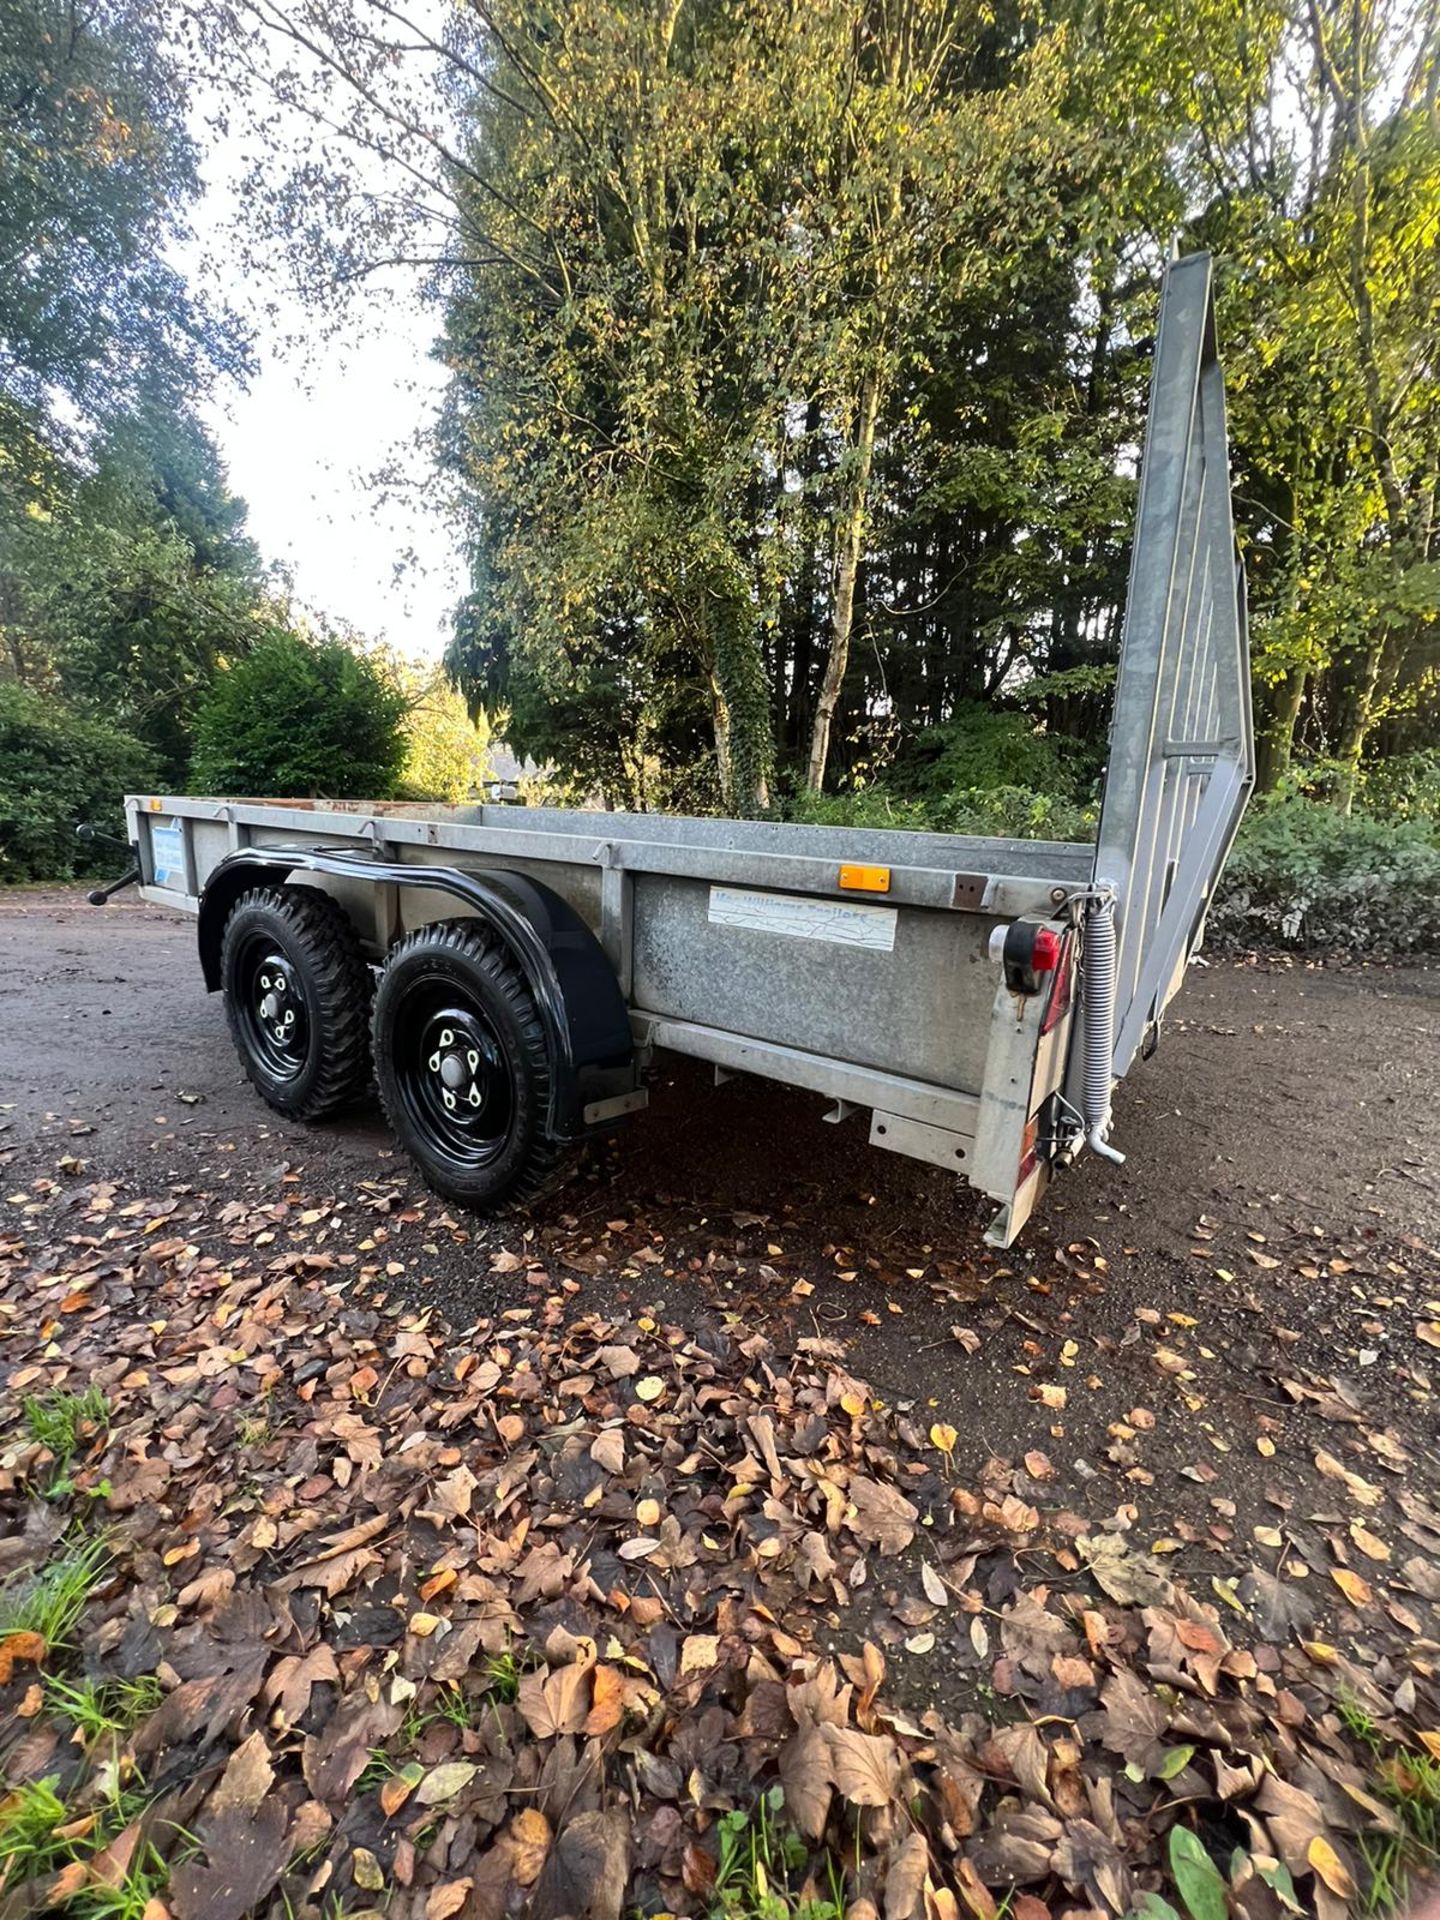 IFOR WILLAMS PLANT TRAILER